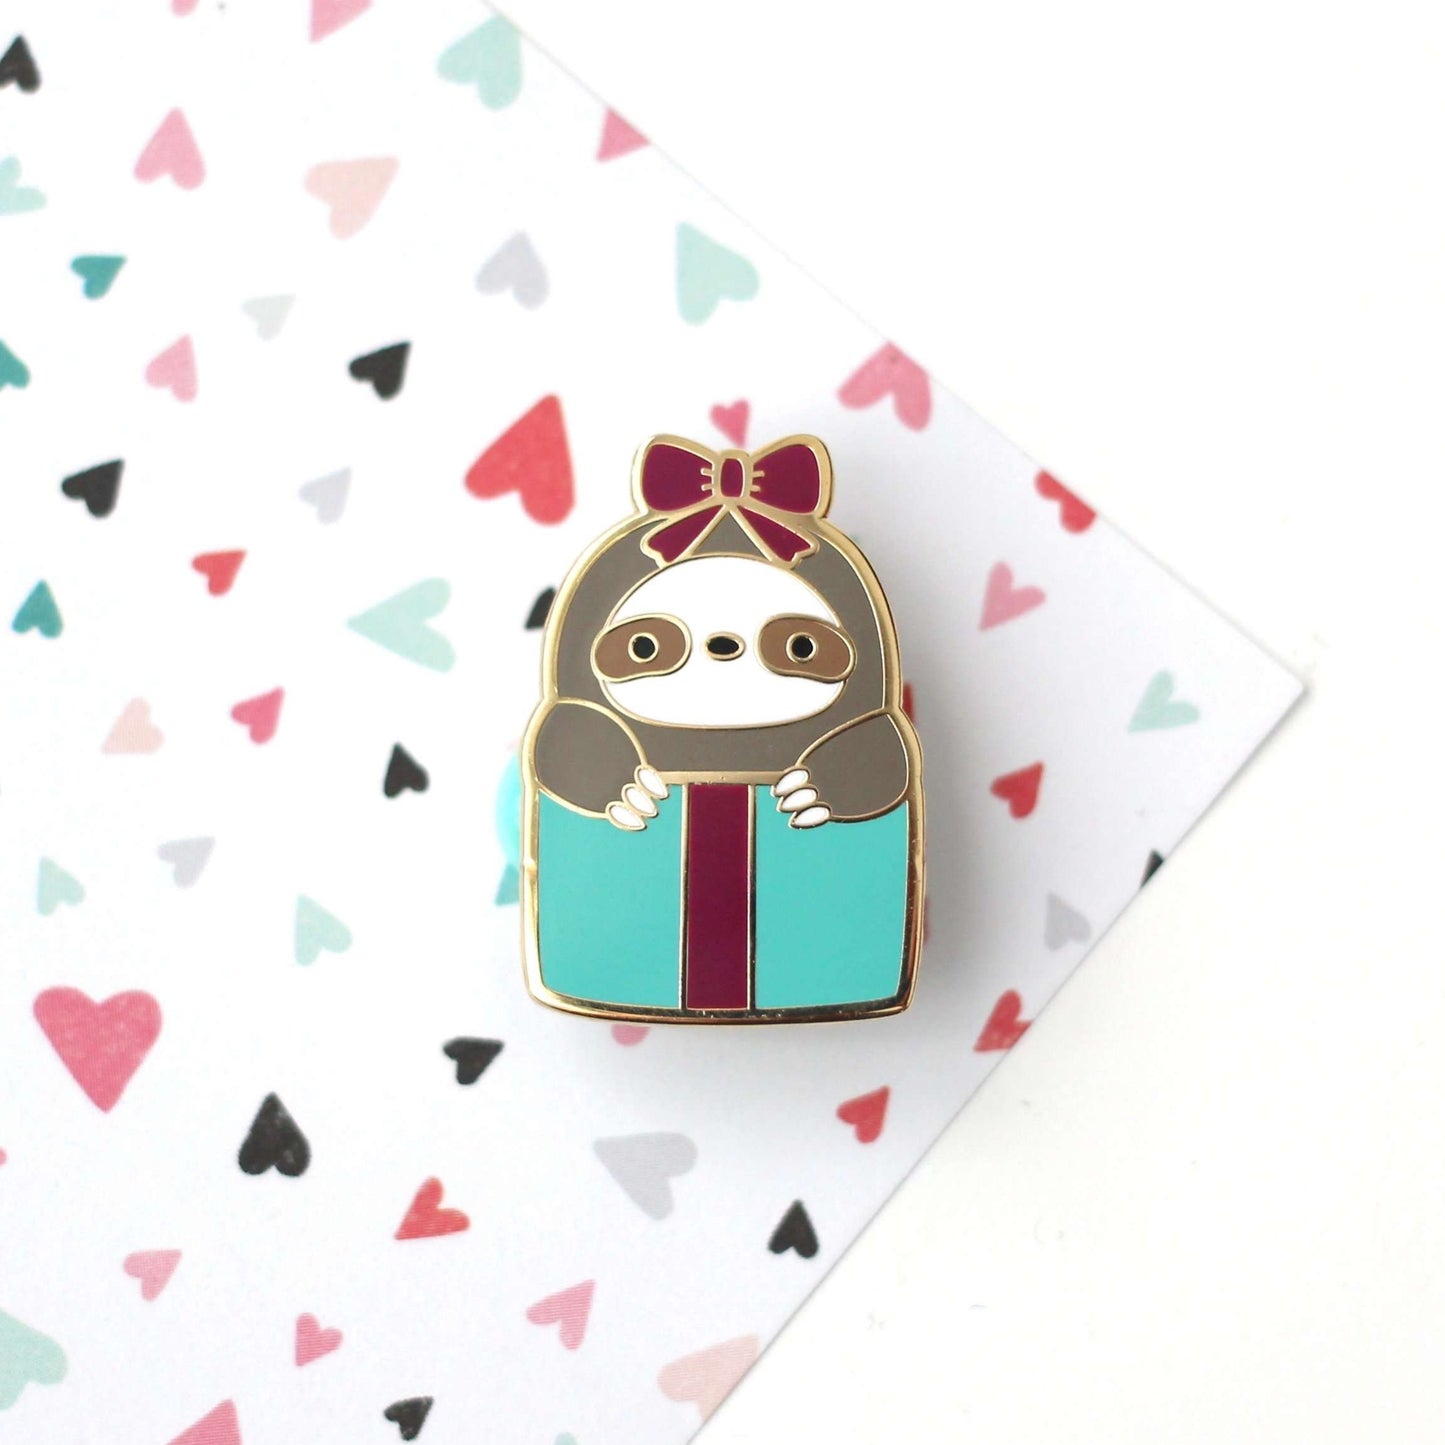 Sloth Christmas Card + Sloth in a Gift Box Enamel Pin by Wild Whimsy Woolies